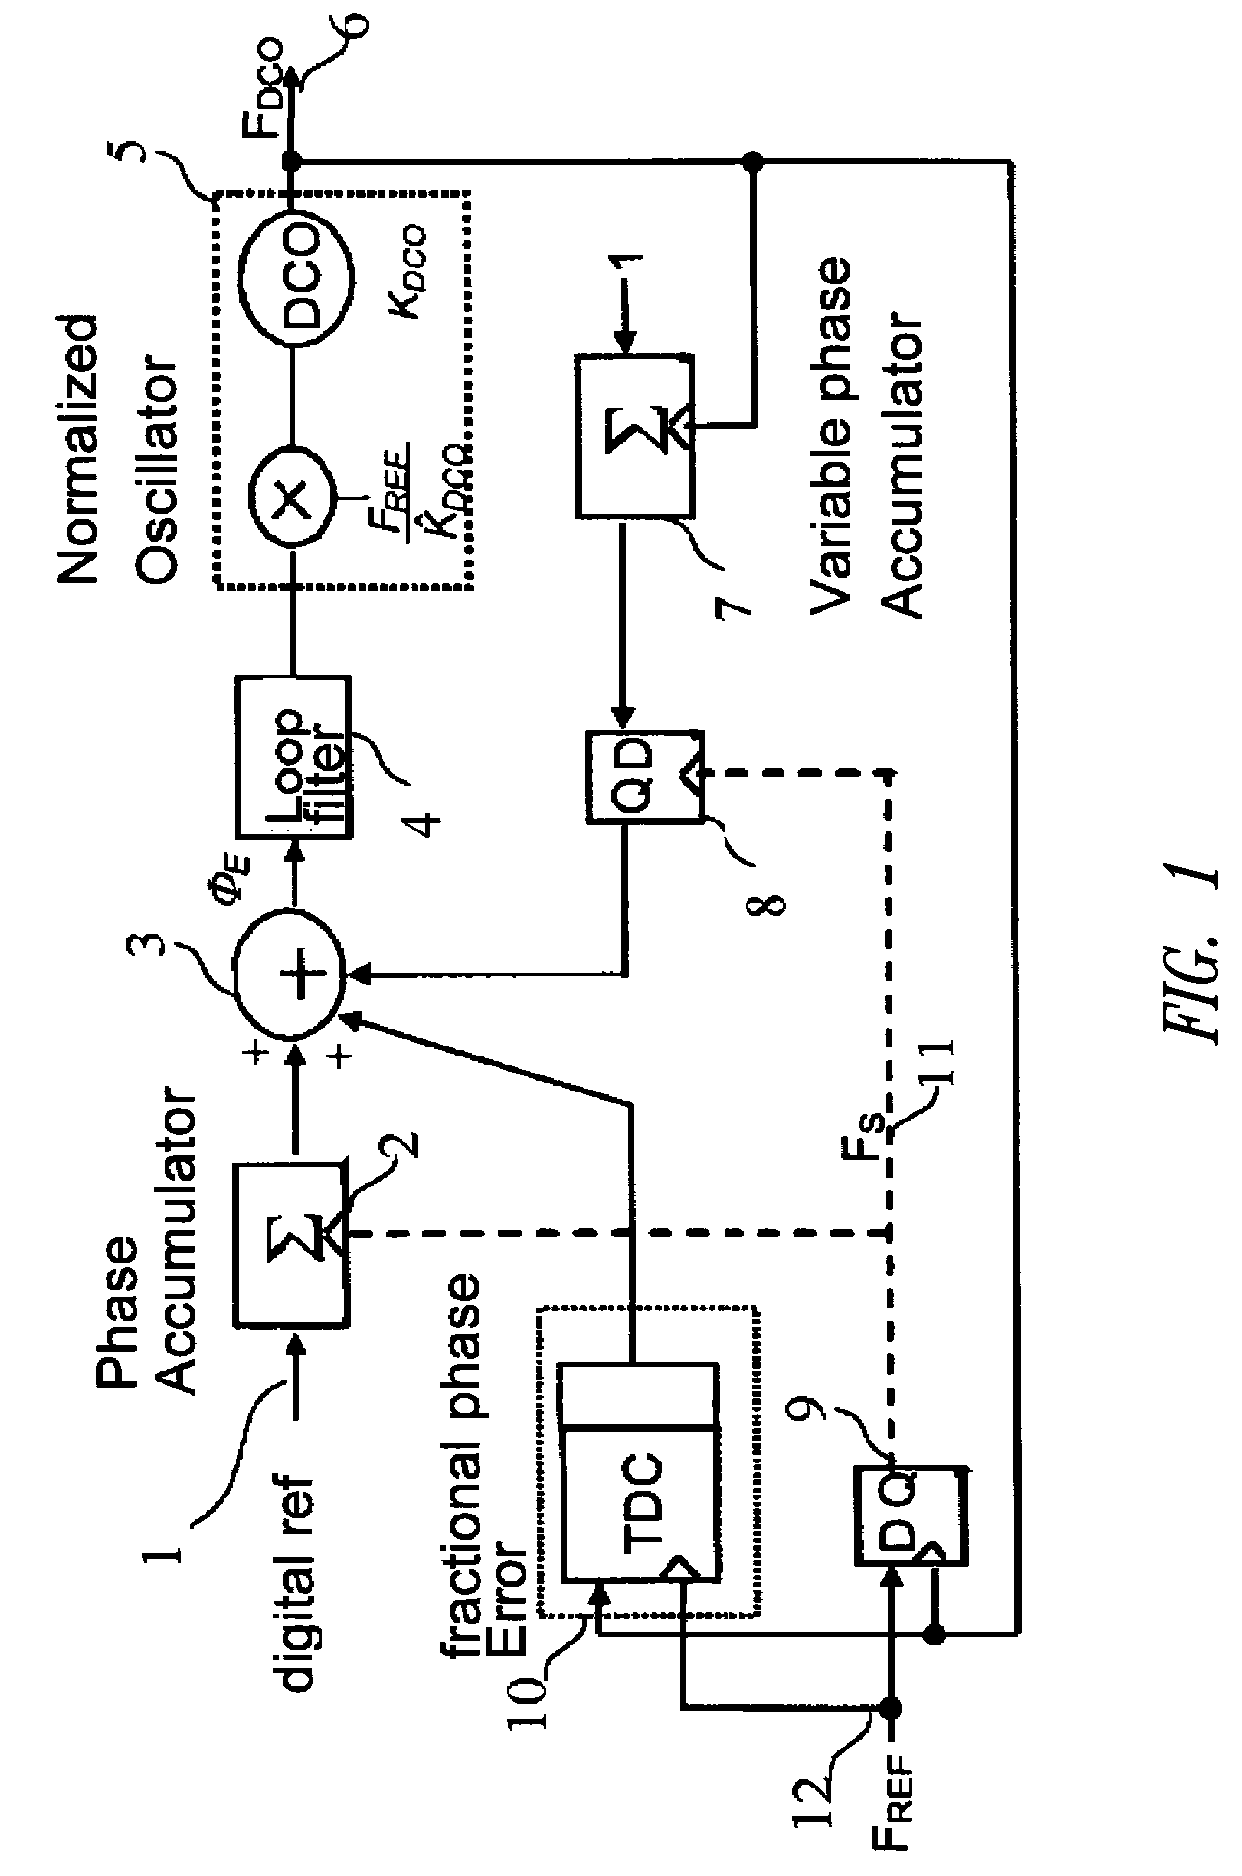 Process for dithering a time to digital converter and circuits for performing said process